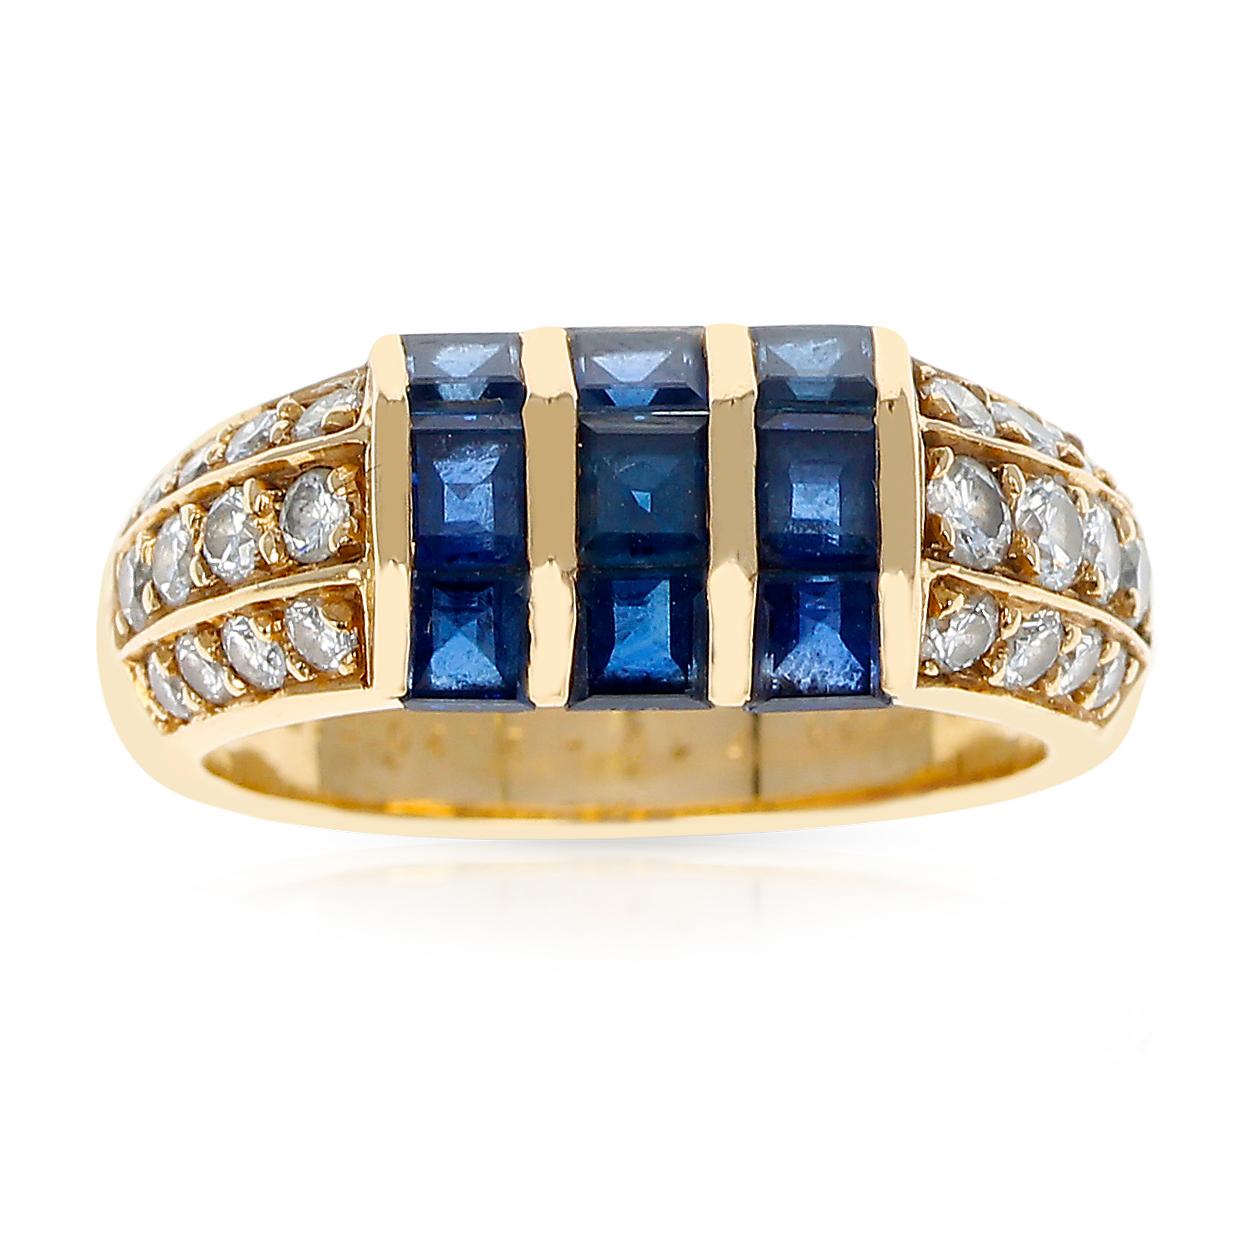 A Van Cleef & Arpels Invisibly-Set Nine Sapphire and Diamonds Ring in 18 Karat Yellow Gold. Ring Size 6.
There are 24 diamonds on the mounting. Total Weight: 6.90 grams. 